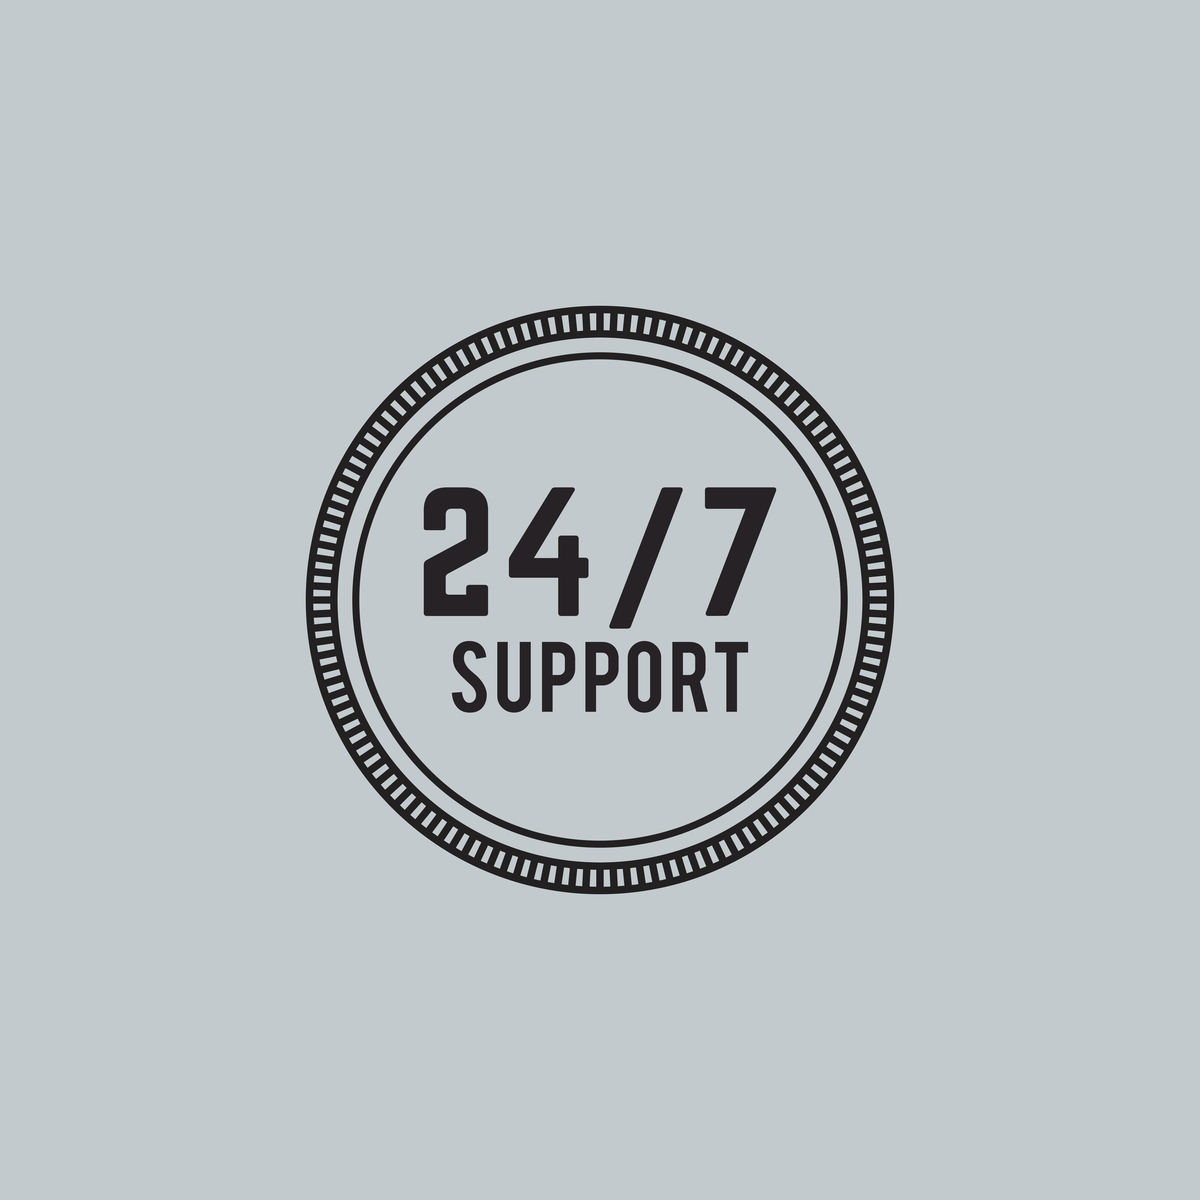 24/7 support graphic to highlight the ability to apply for all day loans